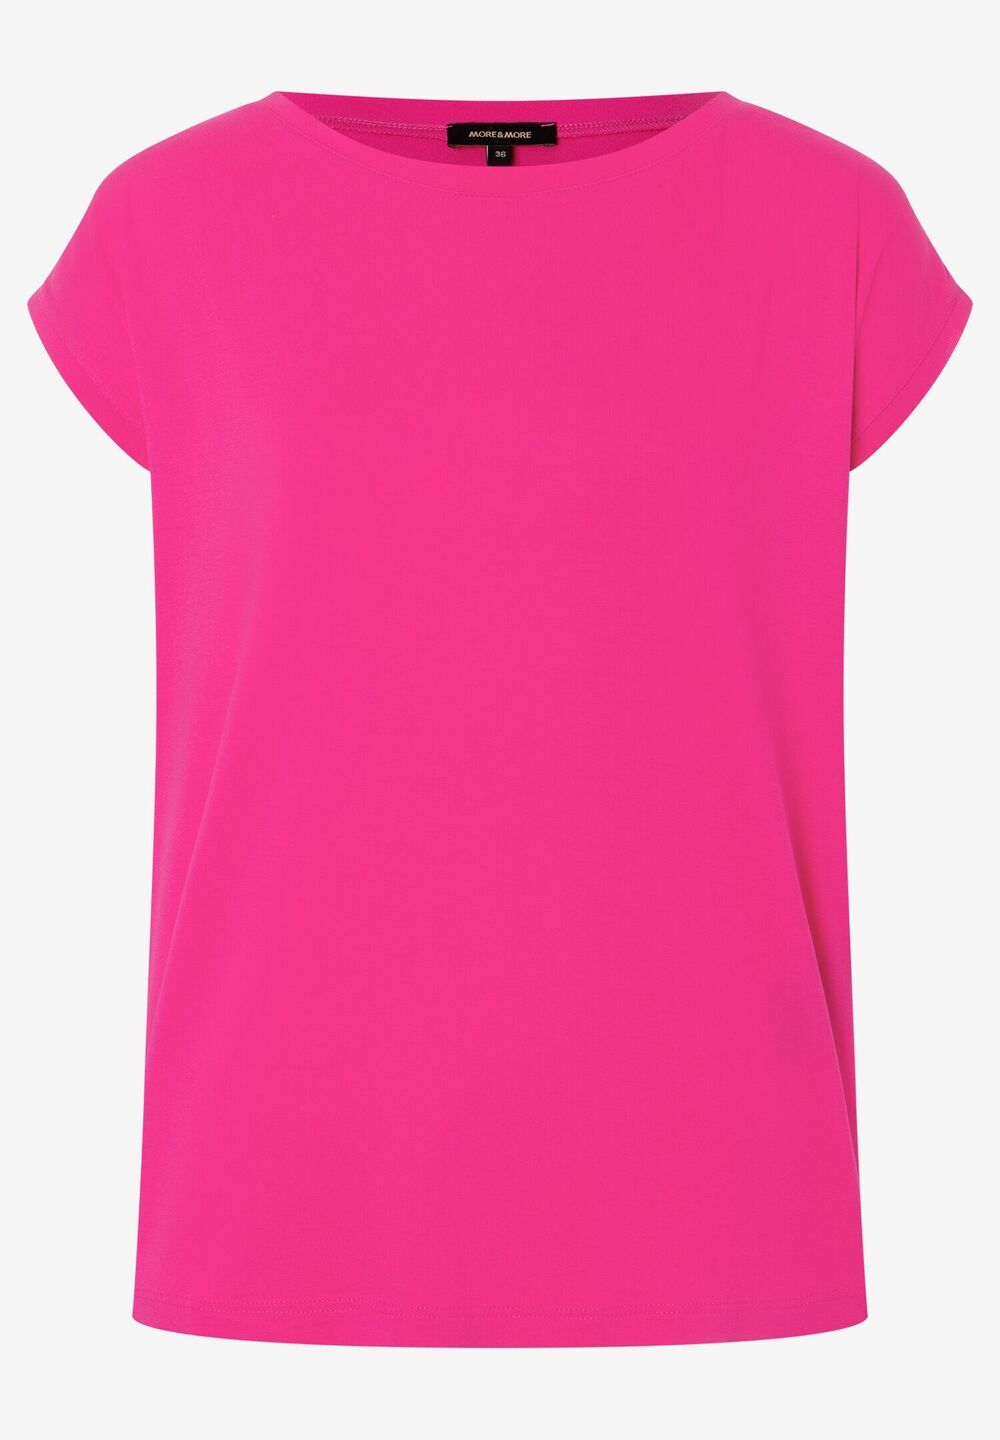 T-Shirt mit Chiffonkante, orchid pink, Sommer-Kollektion, pink Frontansicht